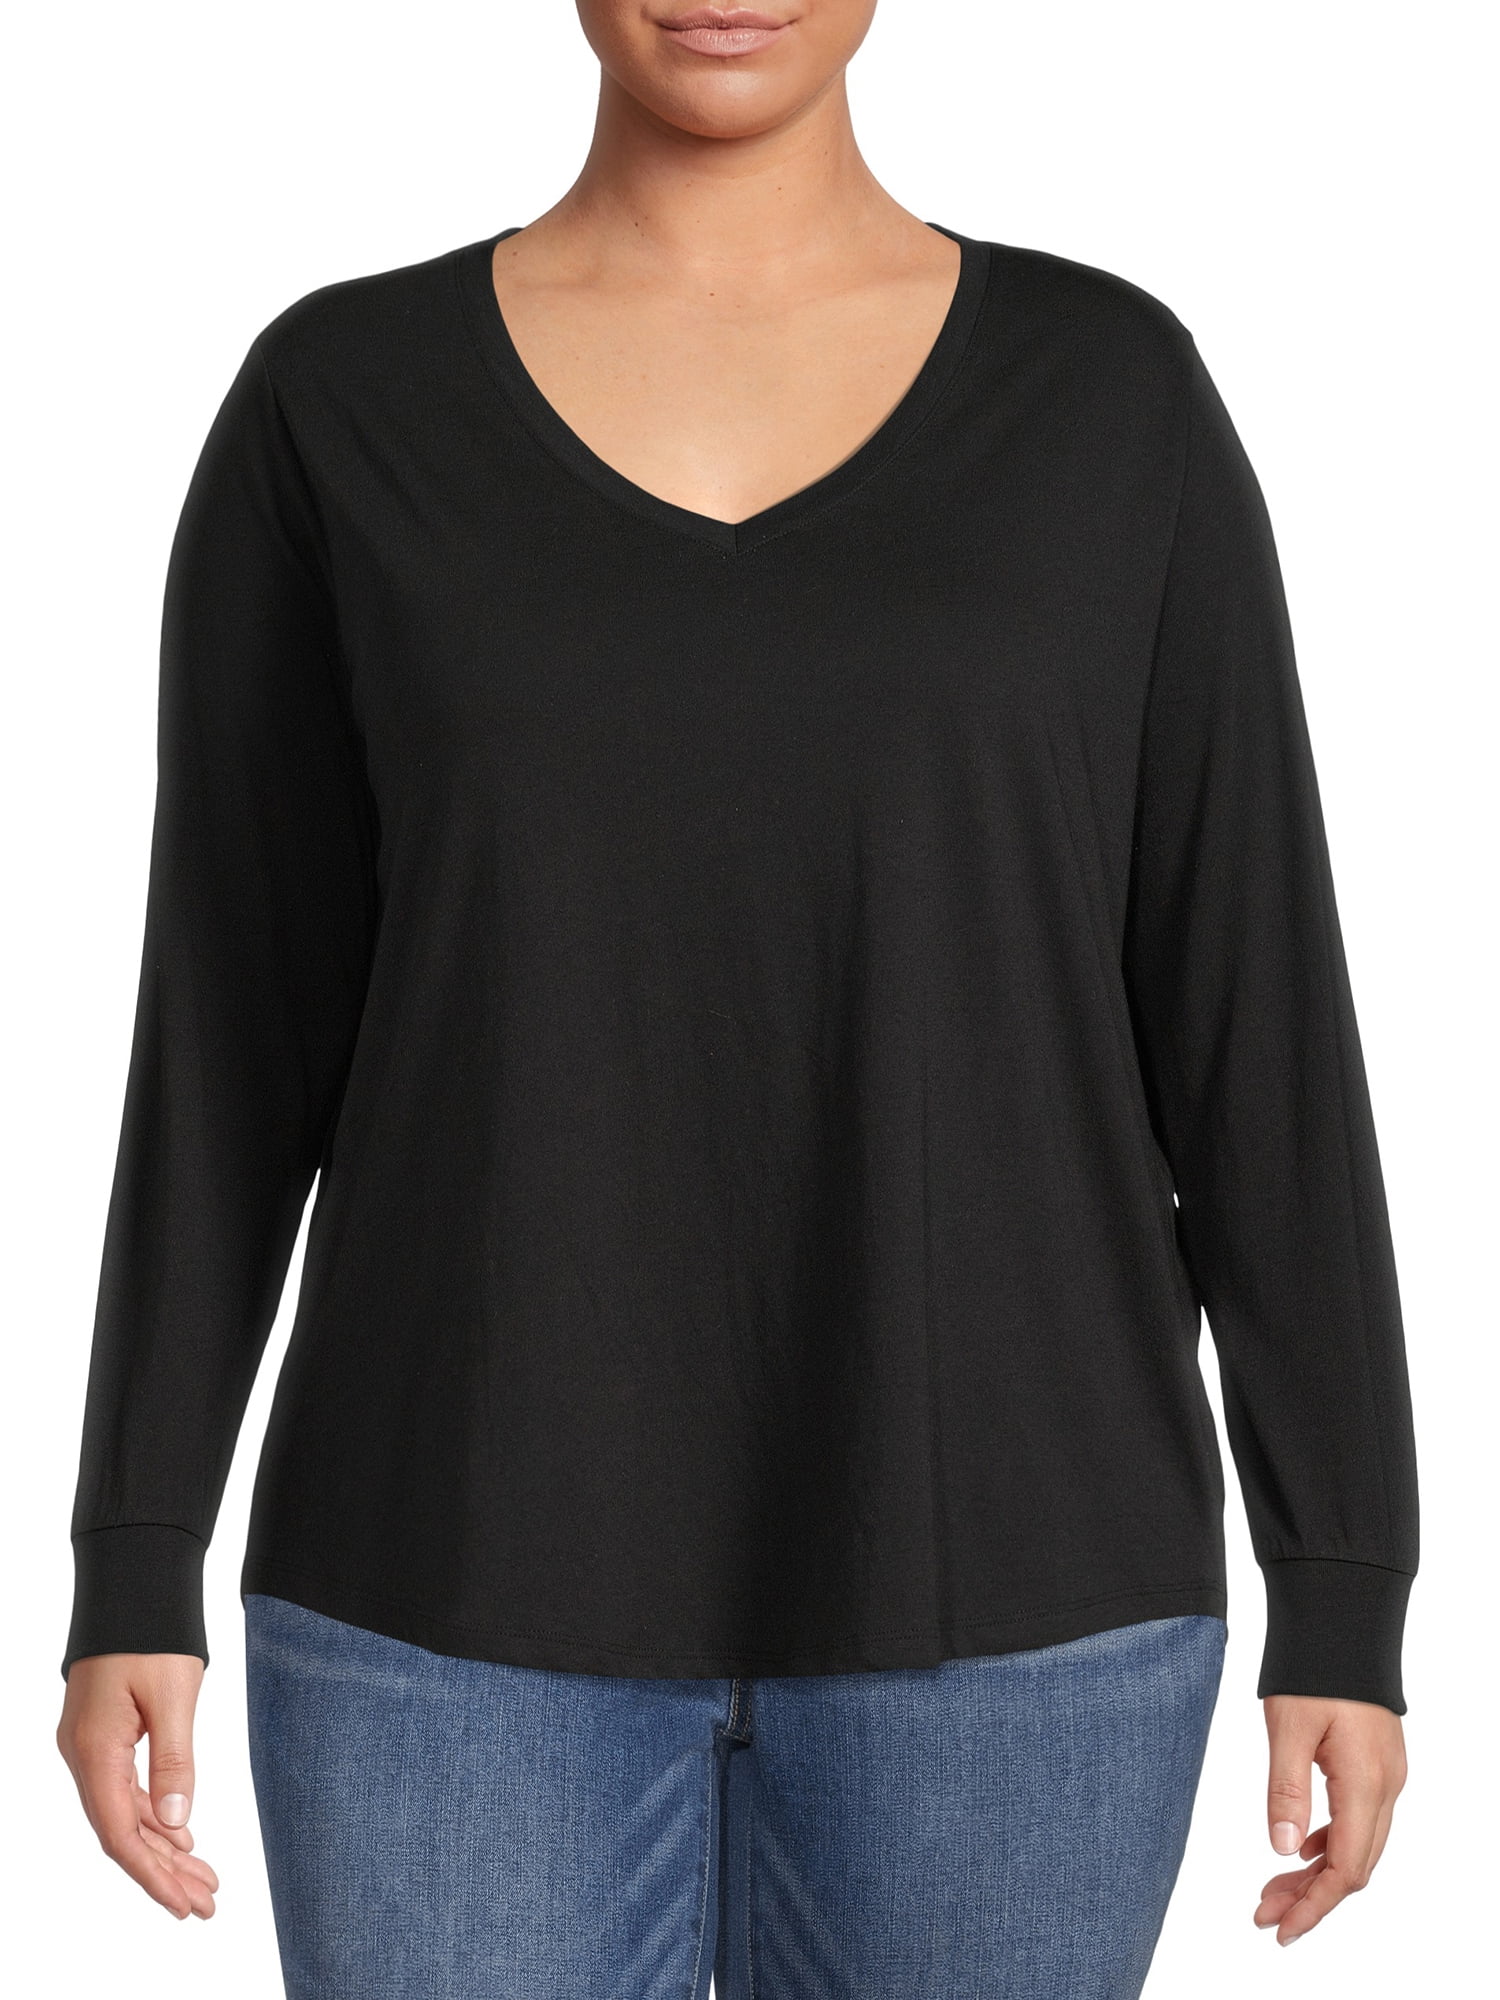 Terra & Sky Women's Plus Size V-Neck Tee with Long Sleeves